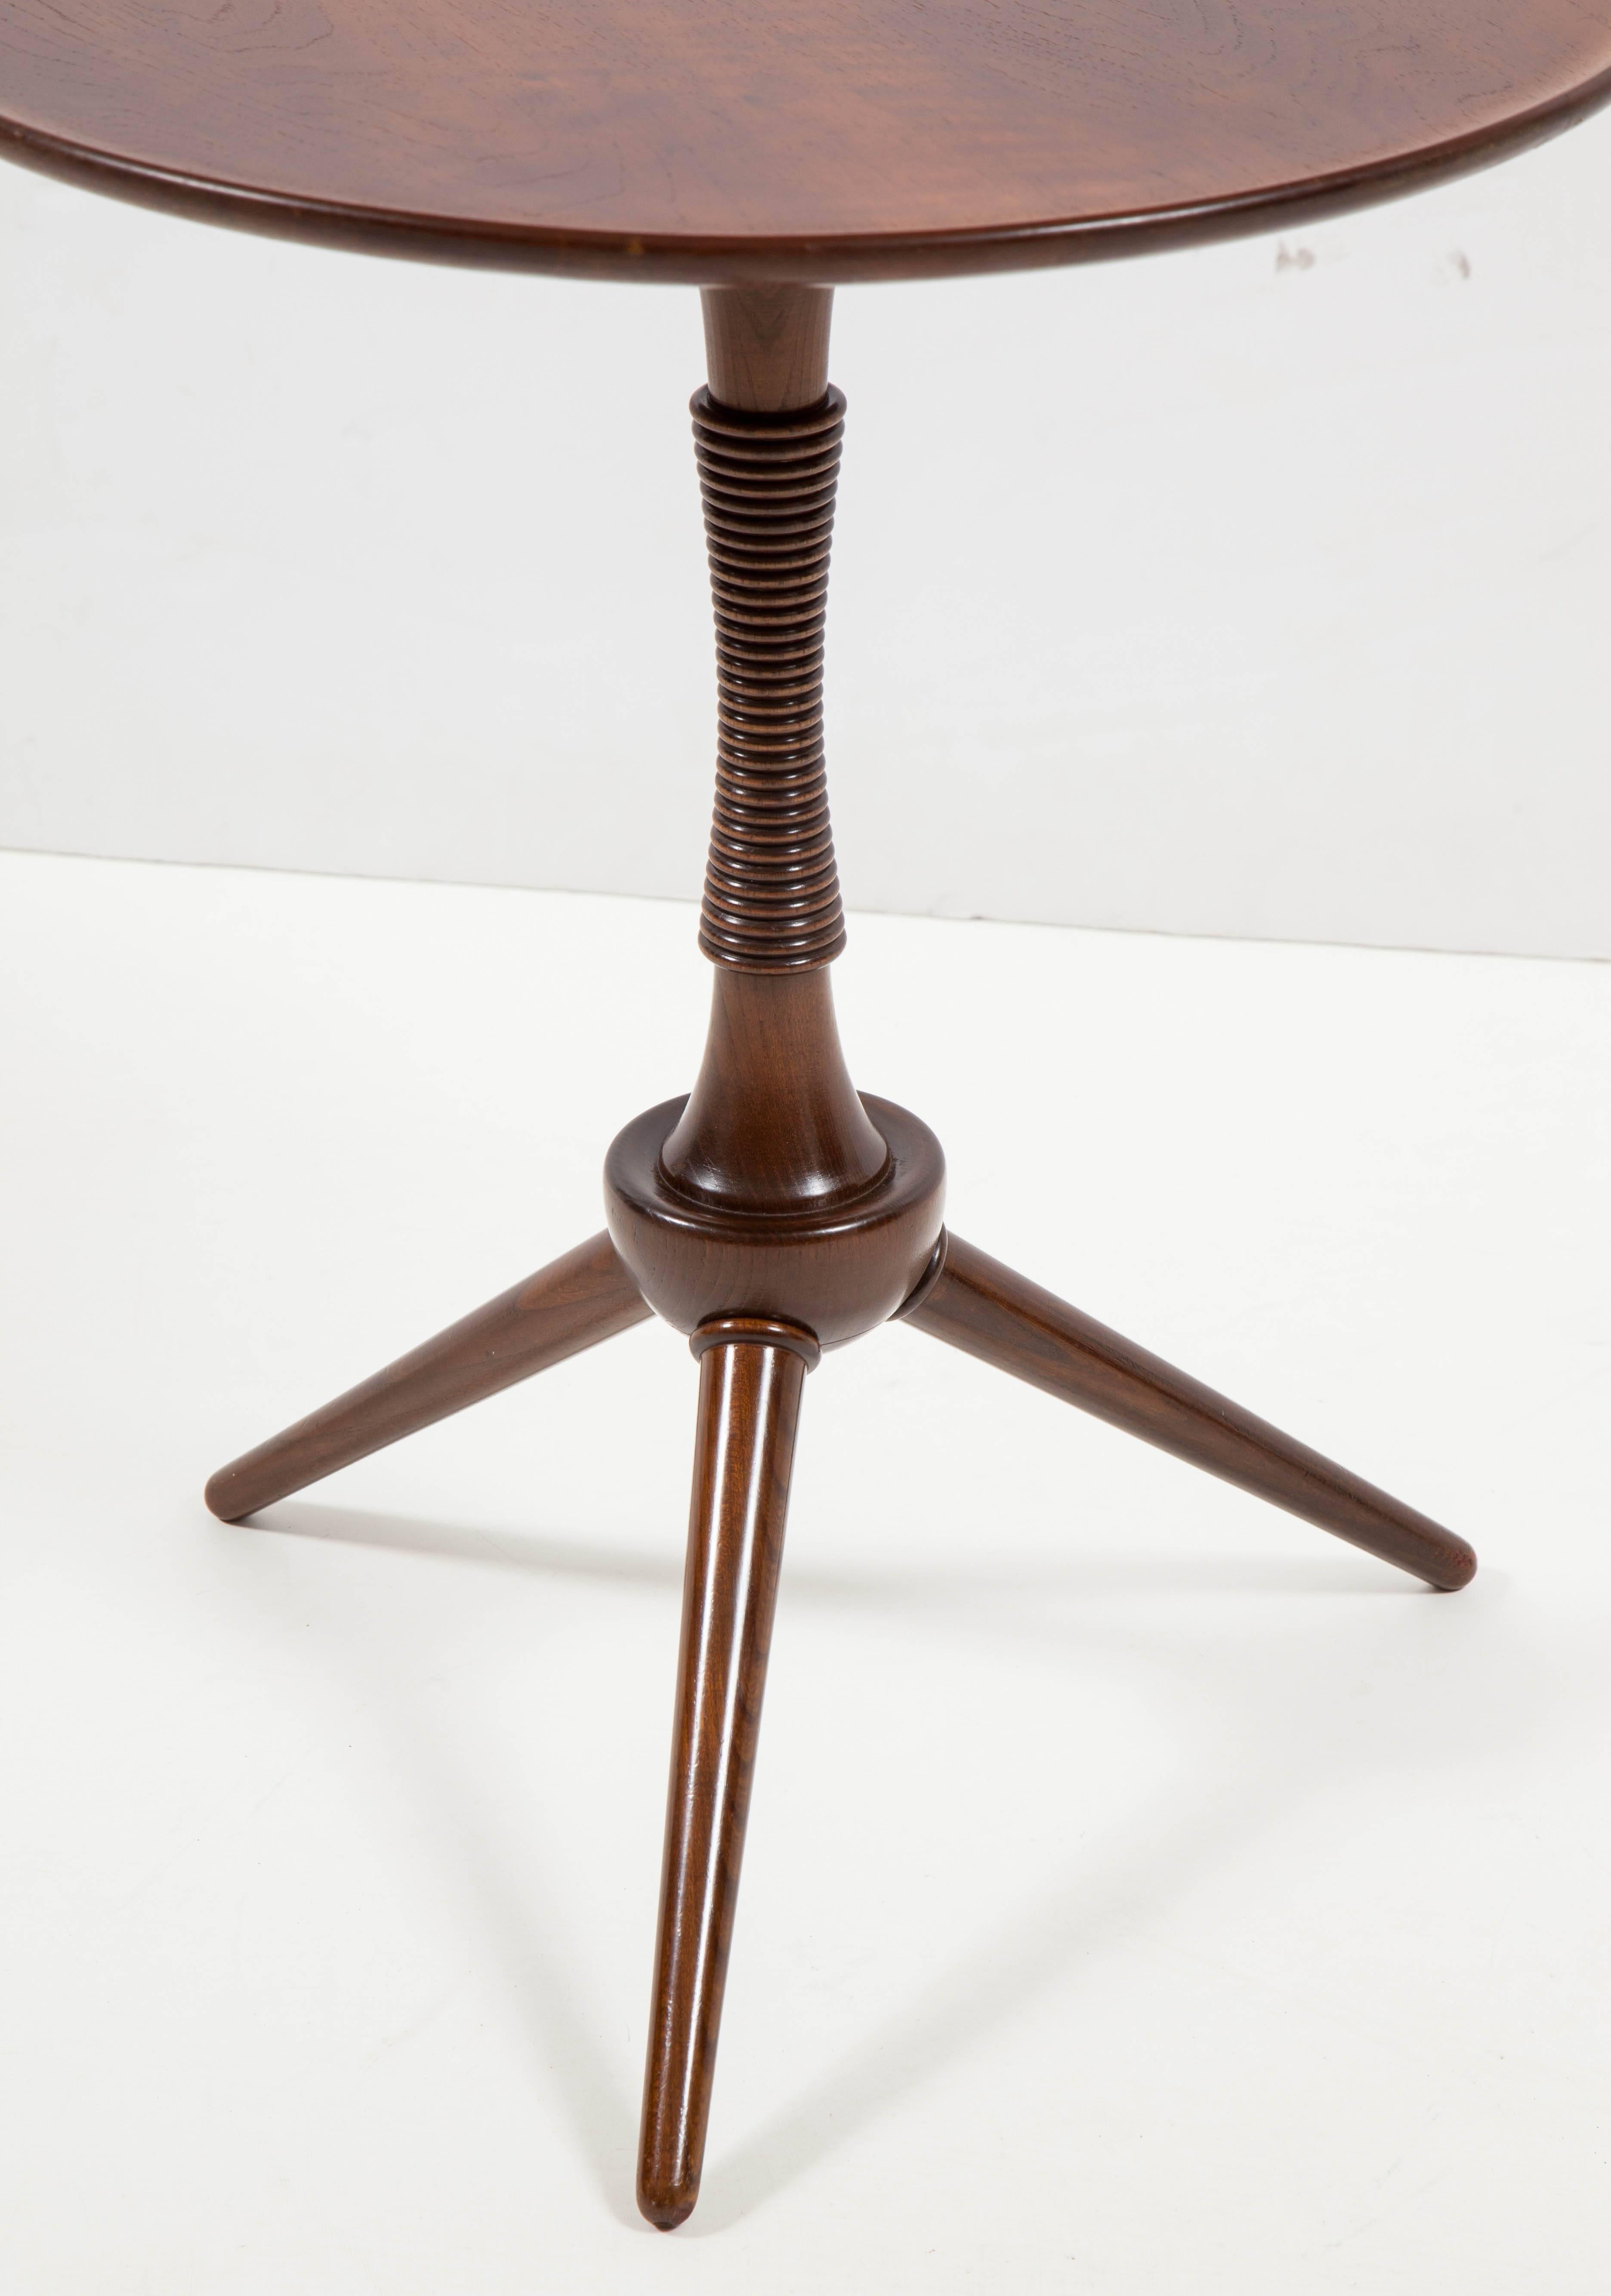 A Danish mahogany tripod table, circa 1940s, designed and produced by Frits Henningsen, with a circular lipped top raised on a partially spool turned tapered and spreading stem ending with three circular tapered legs.